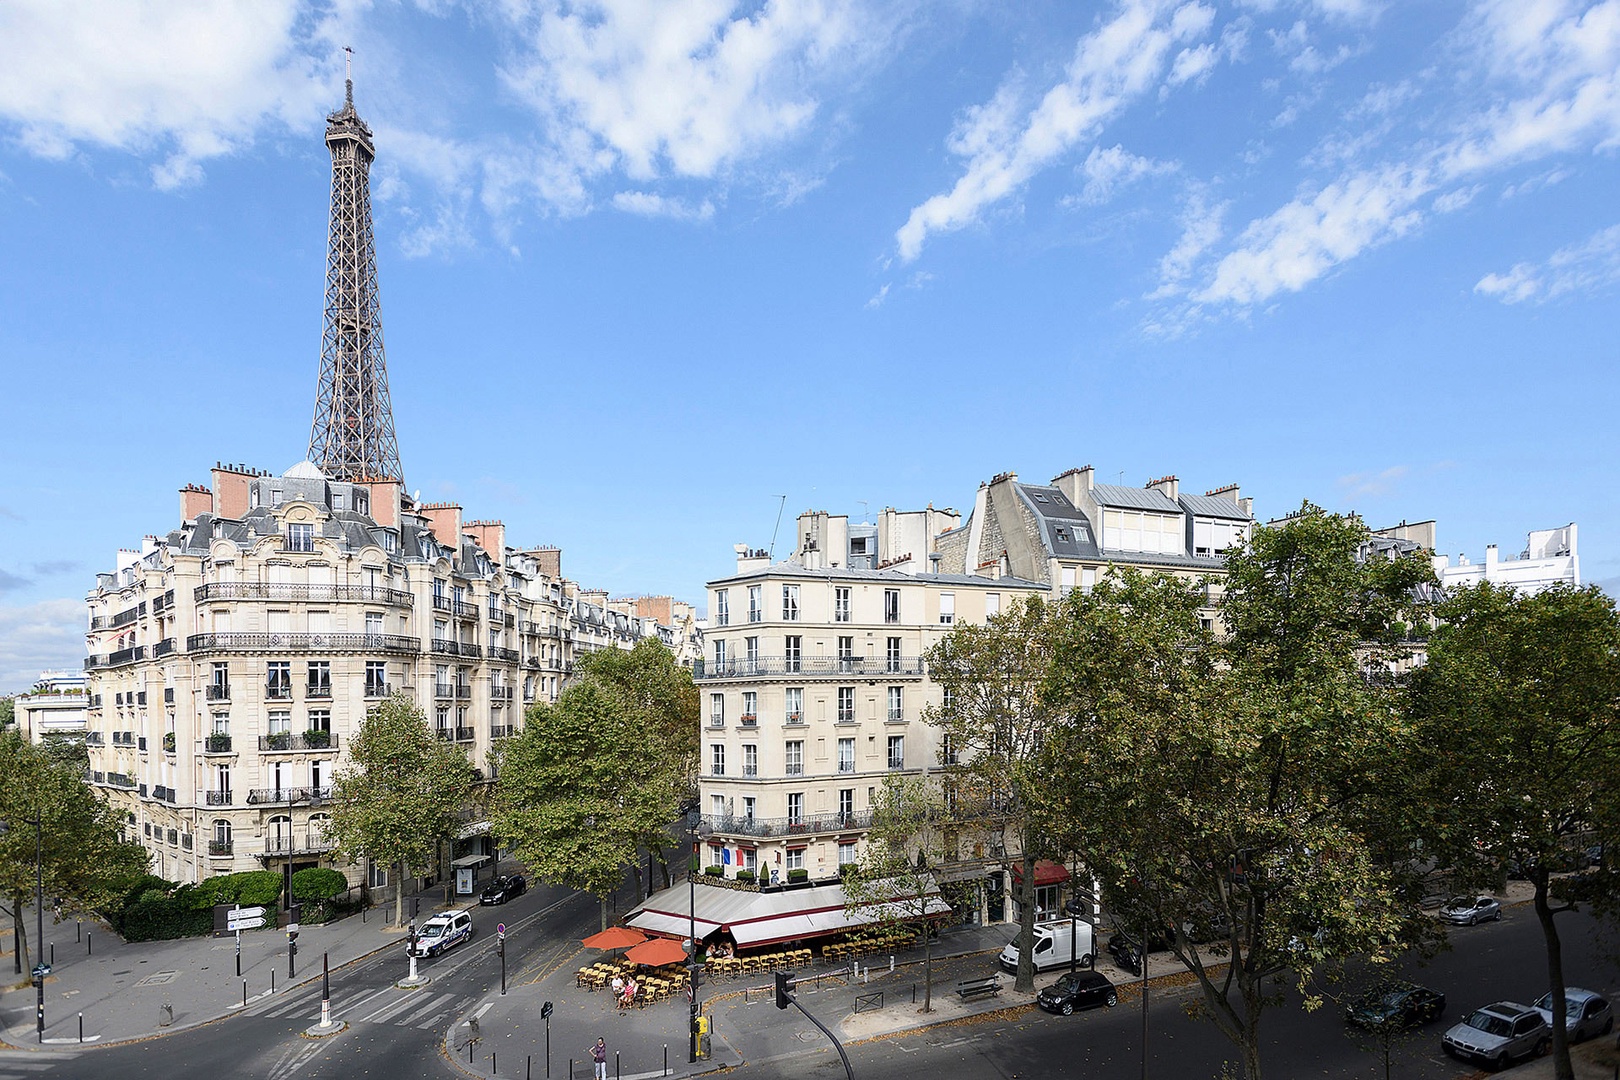 Enjoy stunning views of surrounding buildings and the Eiffel Tower.